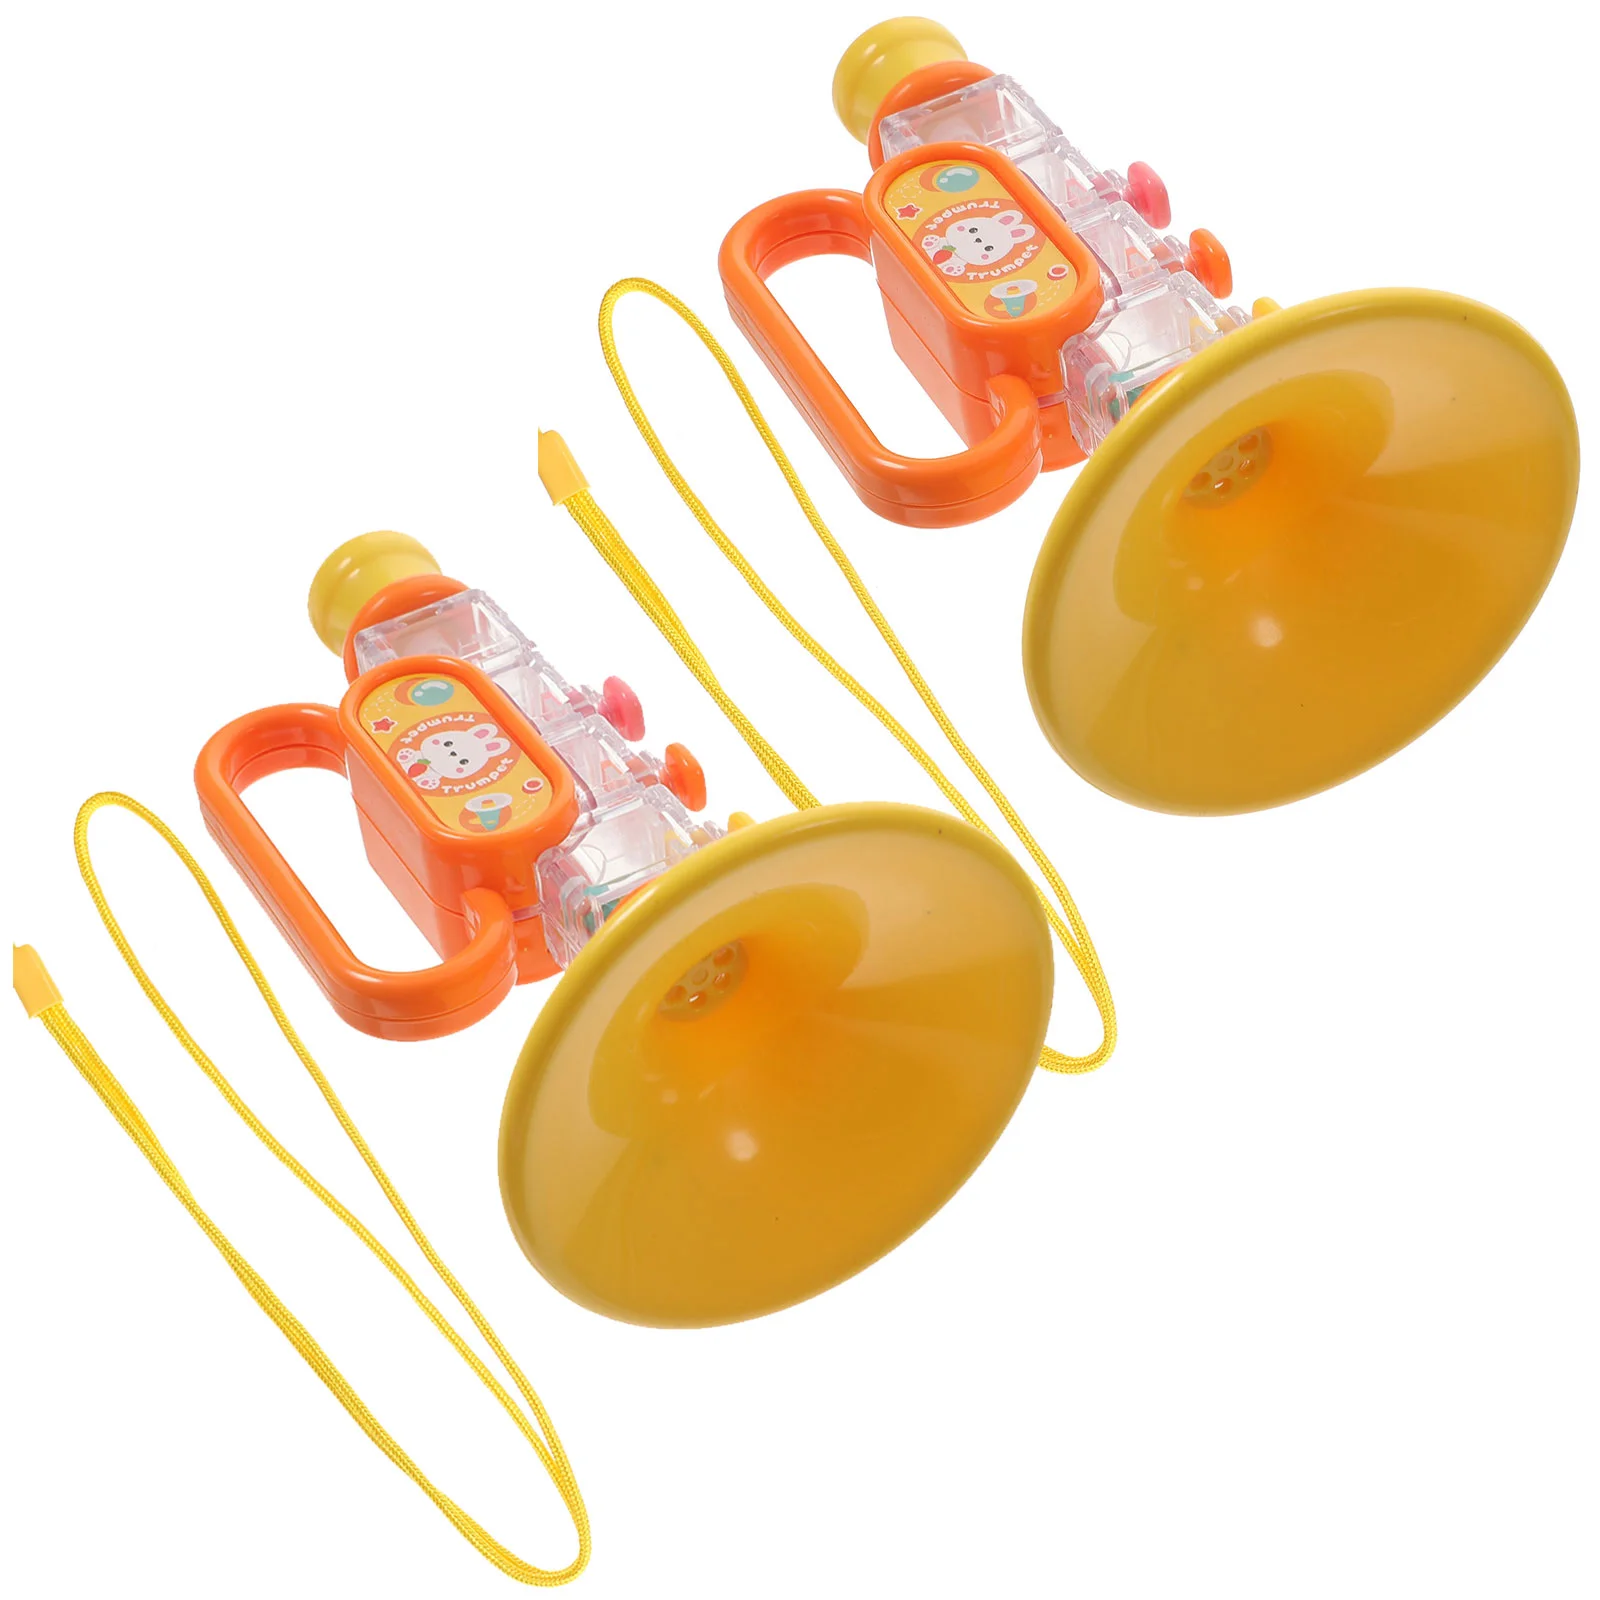 

2 Pcs Baby Trumpet Toy Toddlers Instrument Toys Exquisite Fake Whistle Learning Playthings Party Plastic Kids Enlightenment